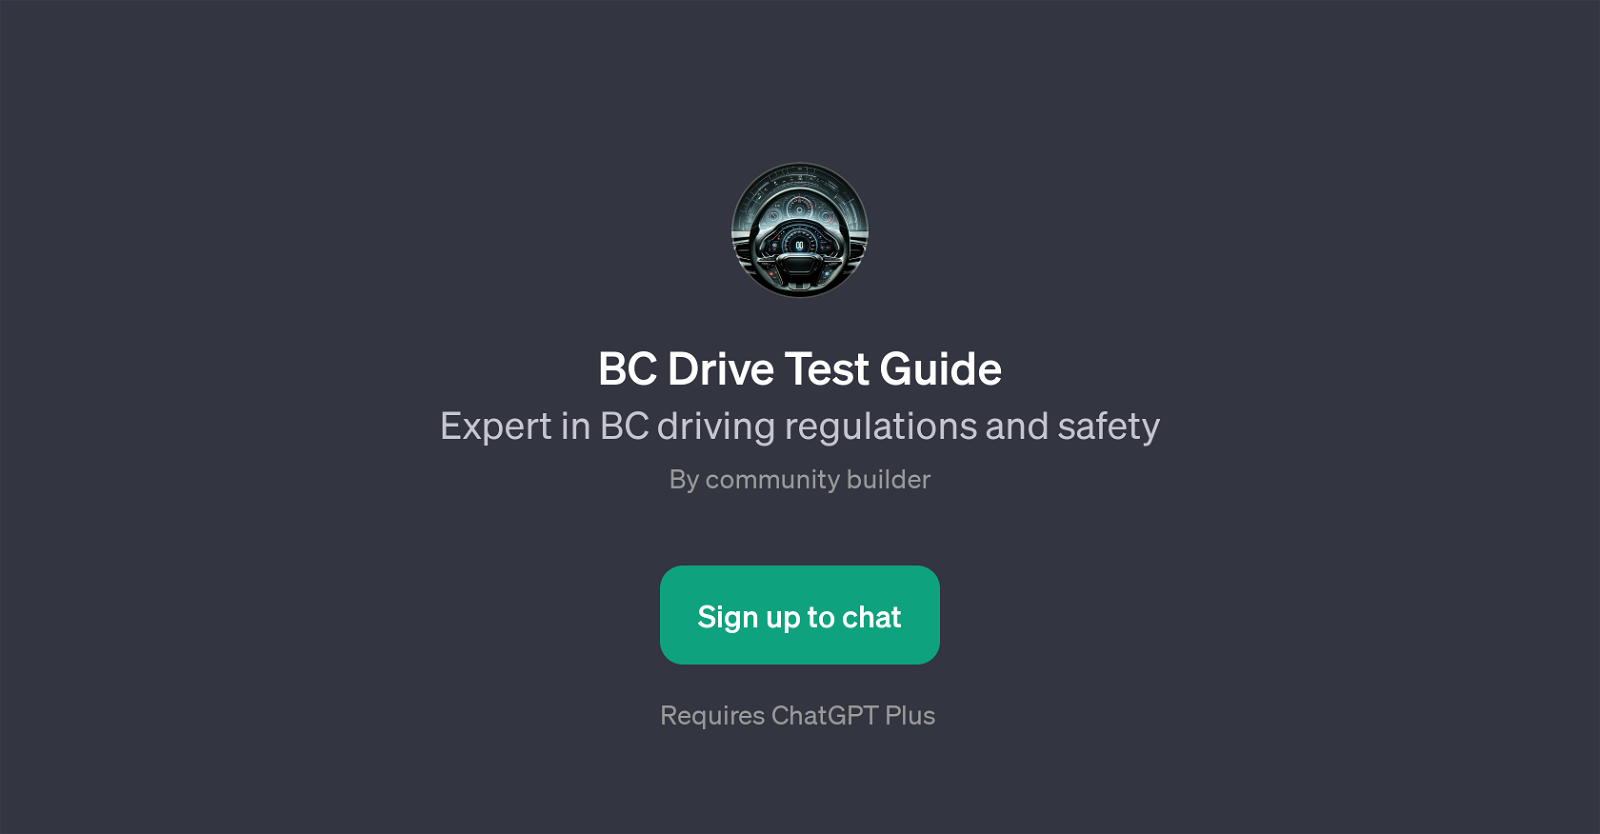 BC Drive Test Guide website